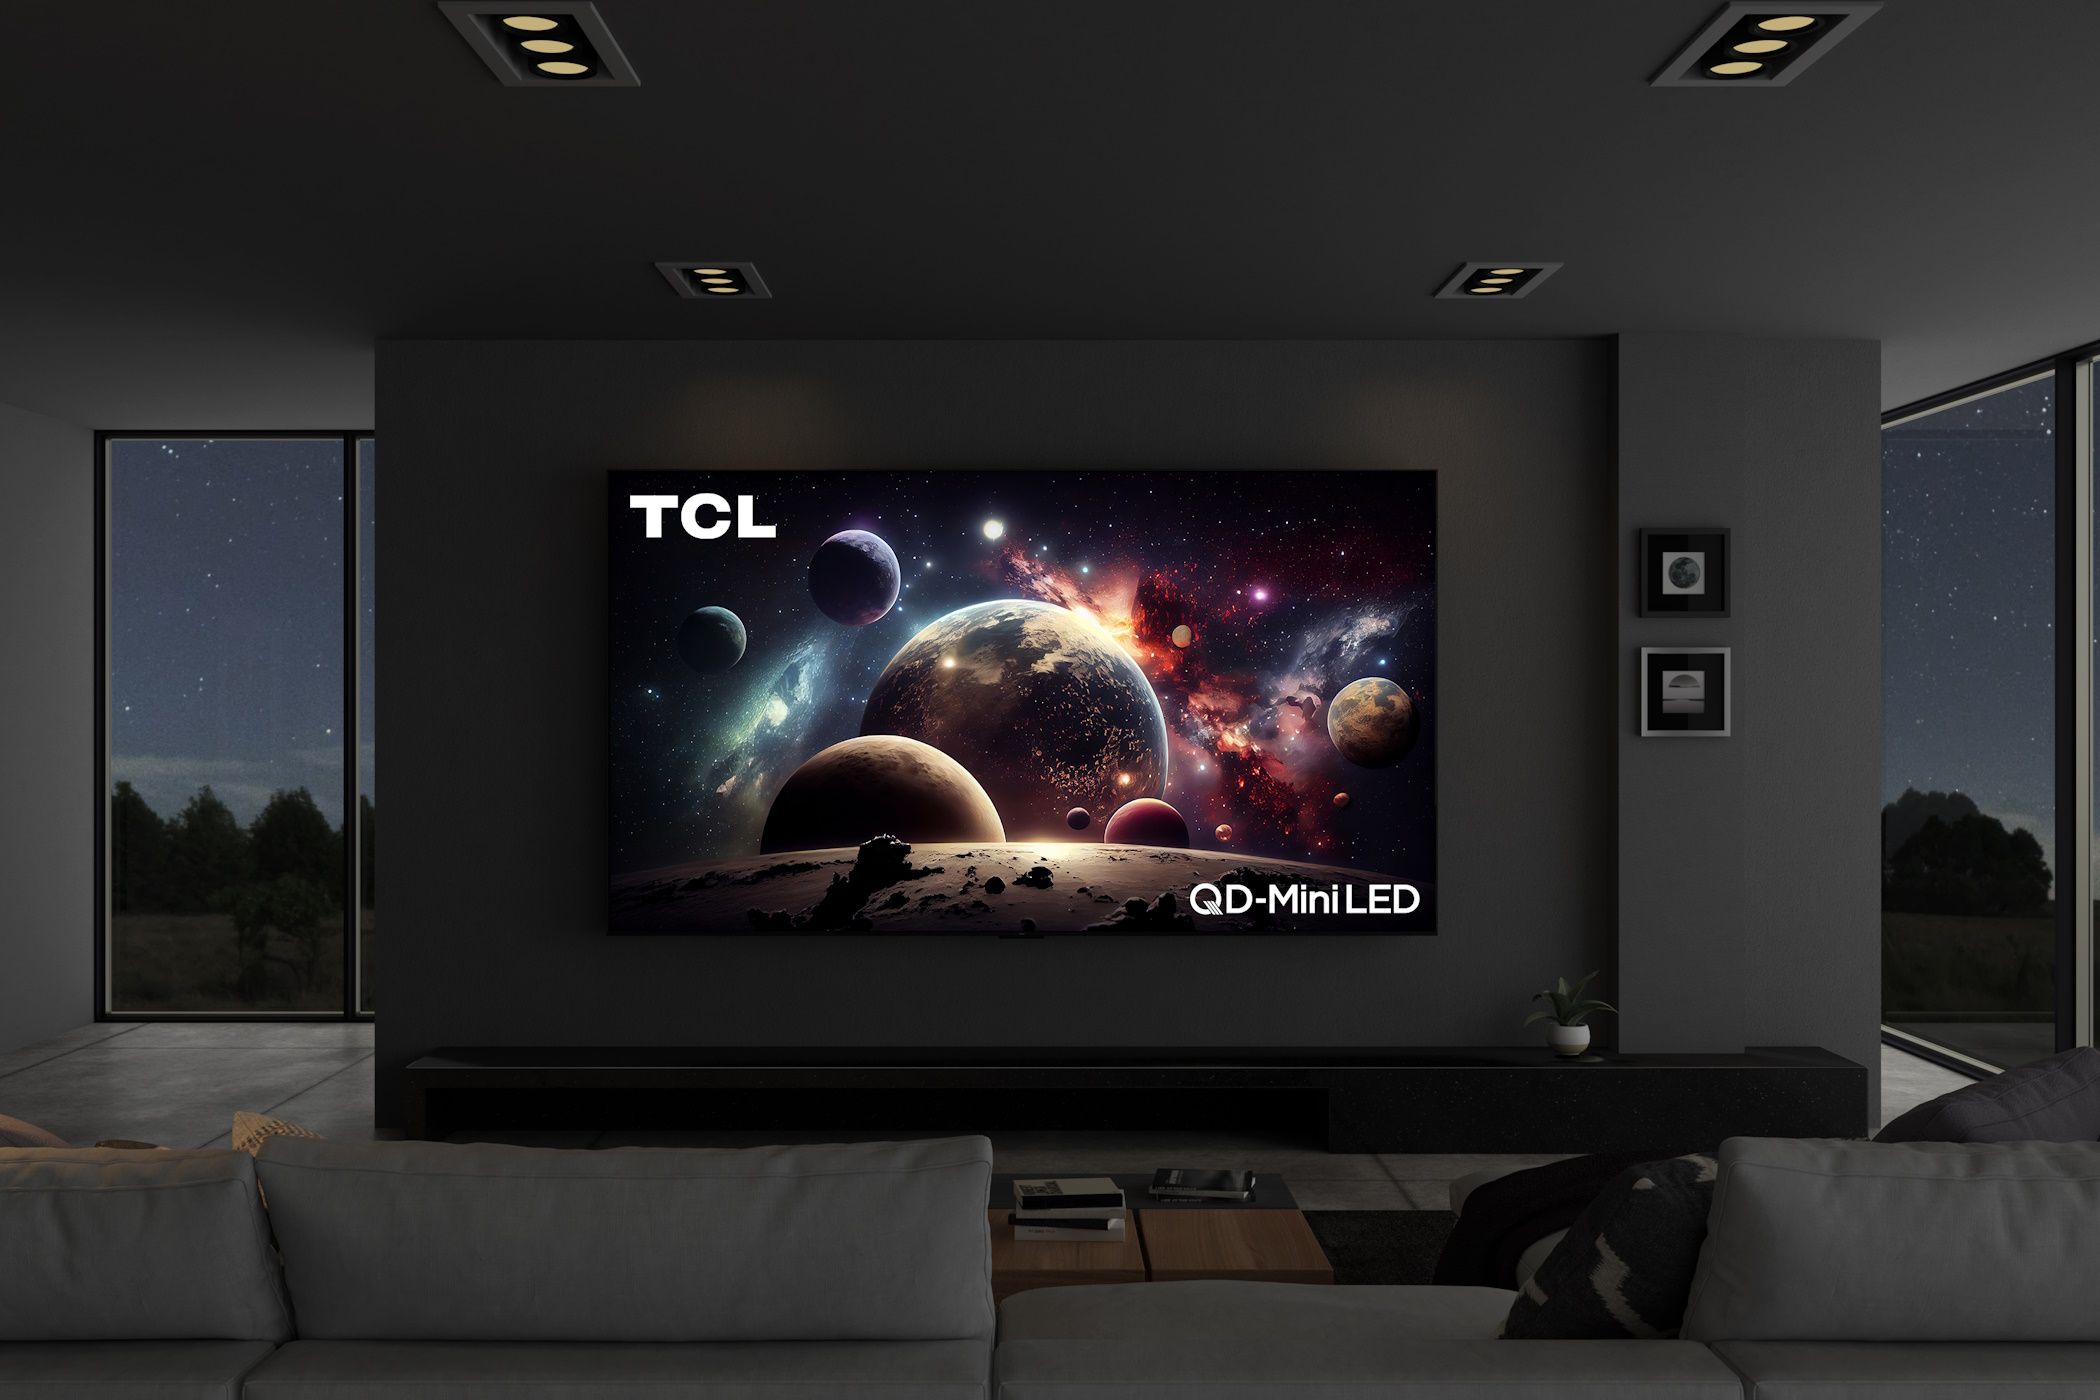 Upscale your Living Room with TCL Mini-LED and Google TV